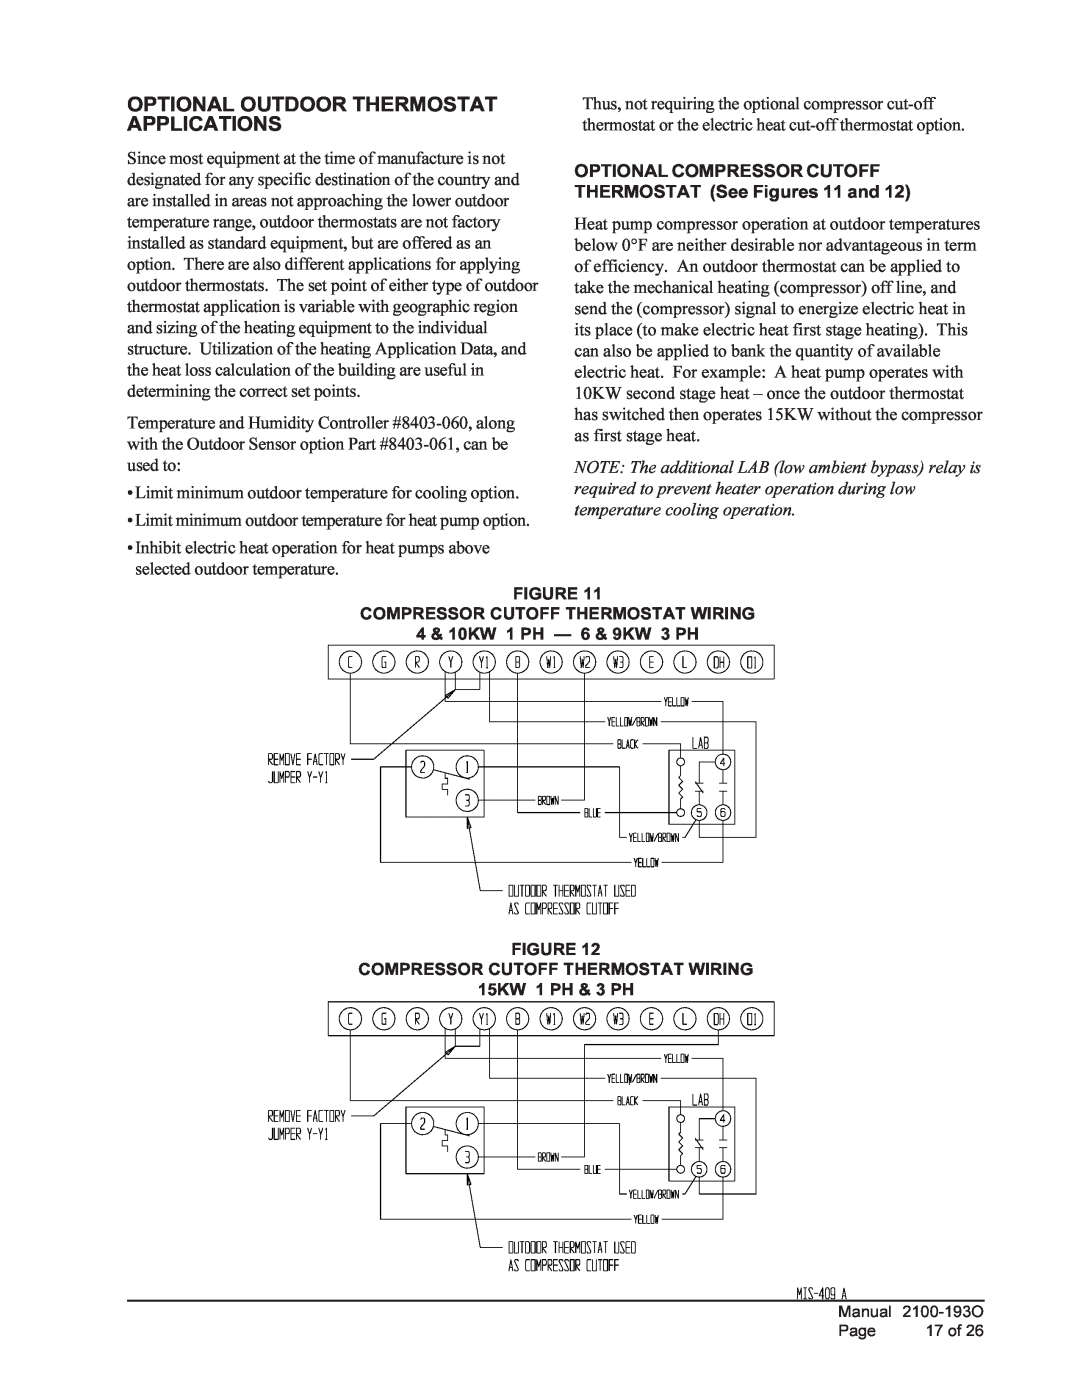 Bard WH361, WH-301 Optional Outdoor Thermostat Applications, Figure Compressor Cutoff Thermostat Wiring, 15KW 1 PH & 3 PH 